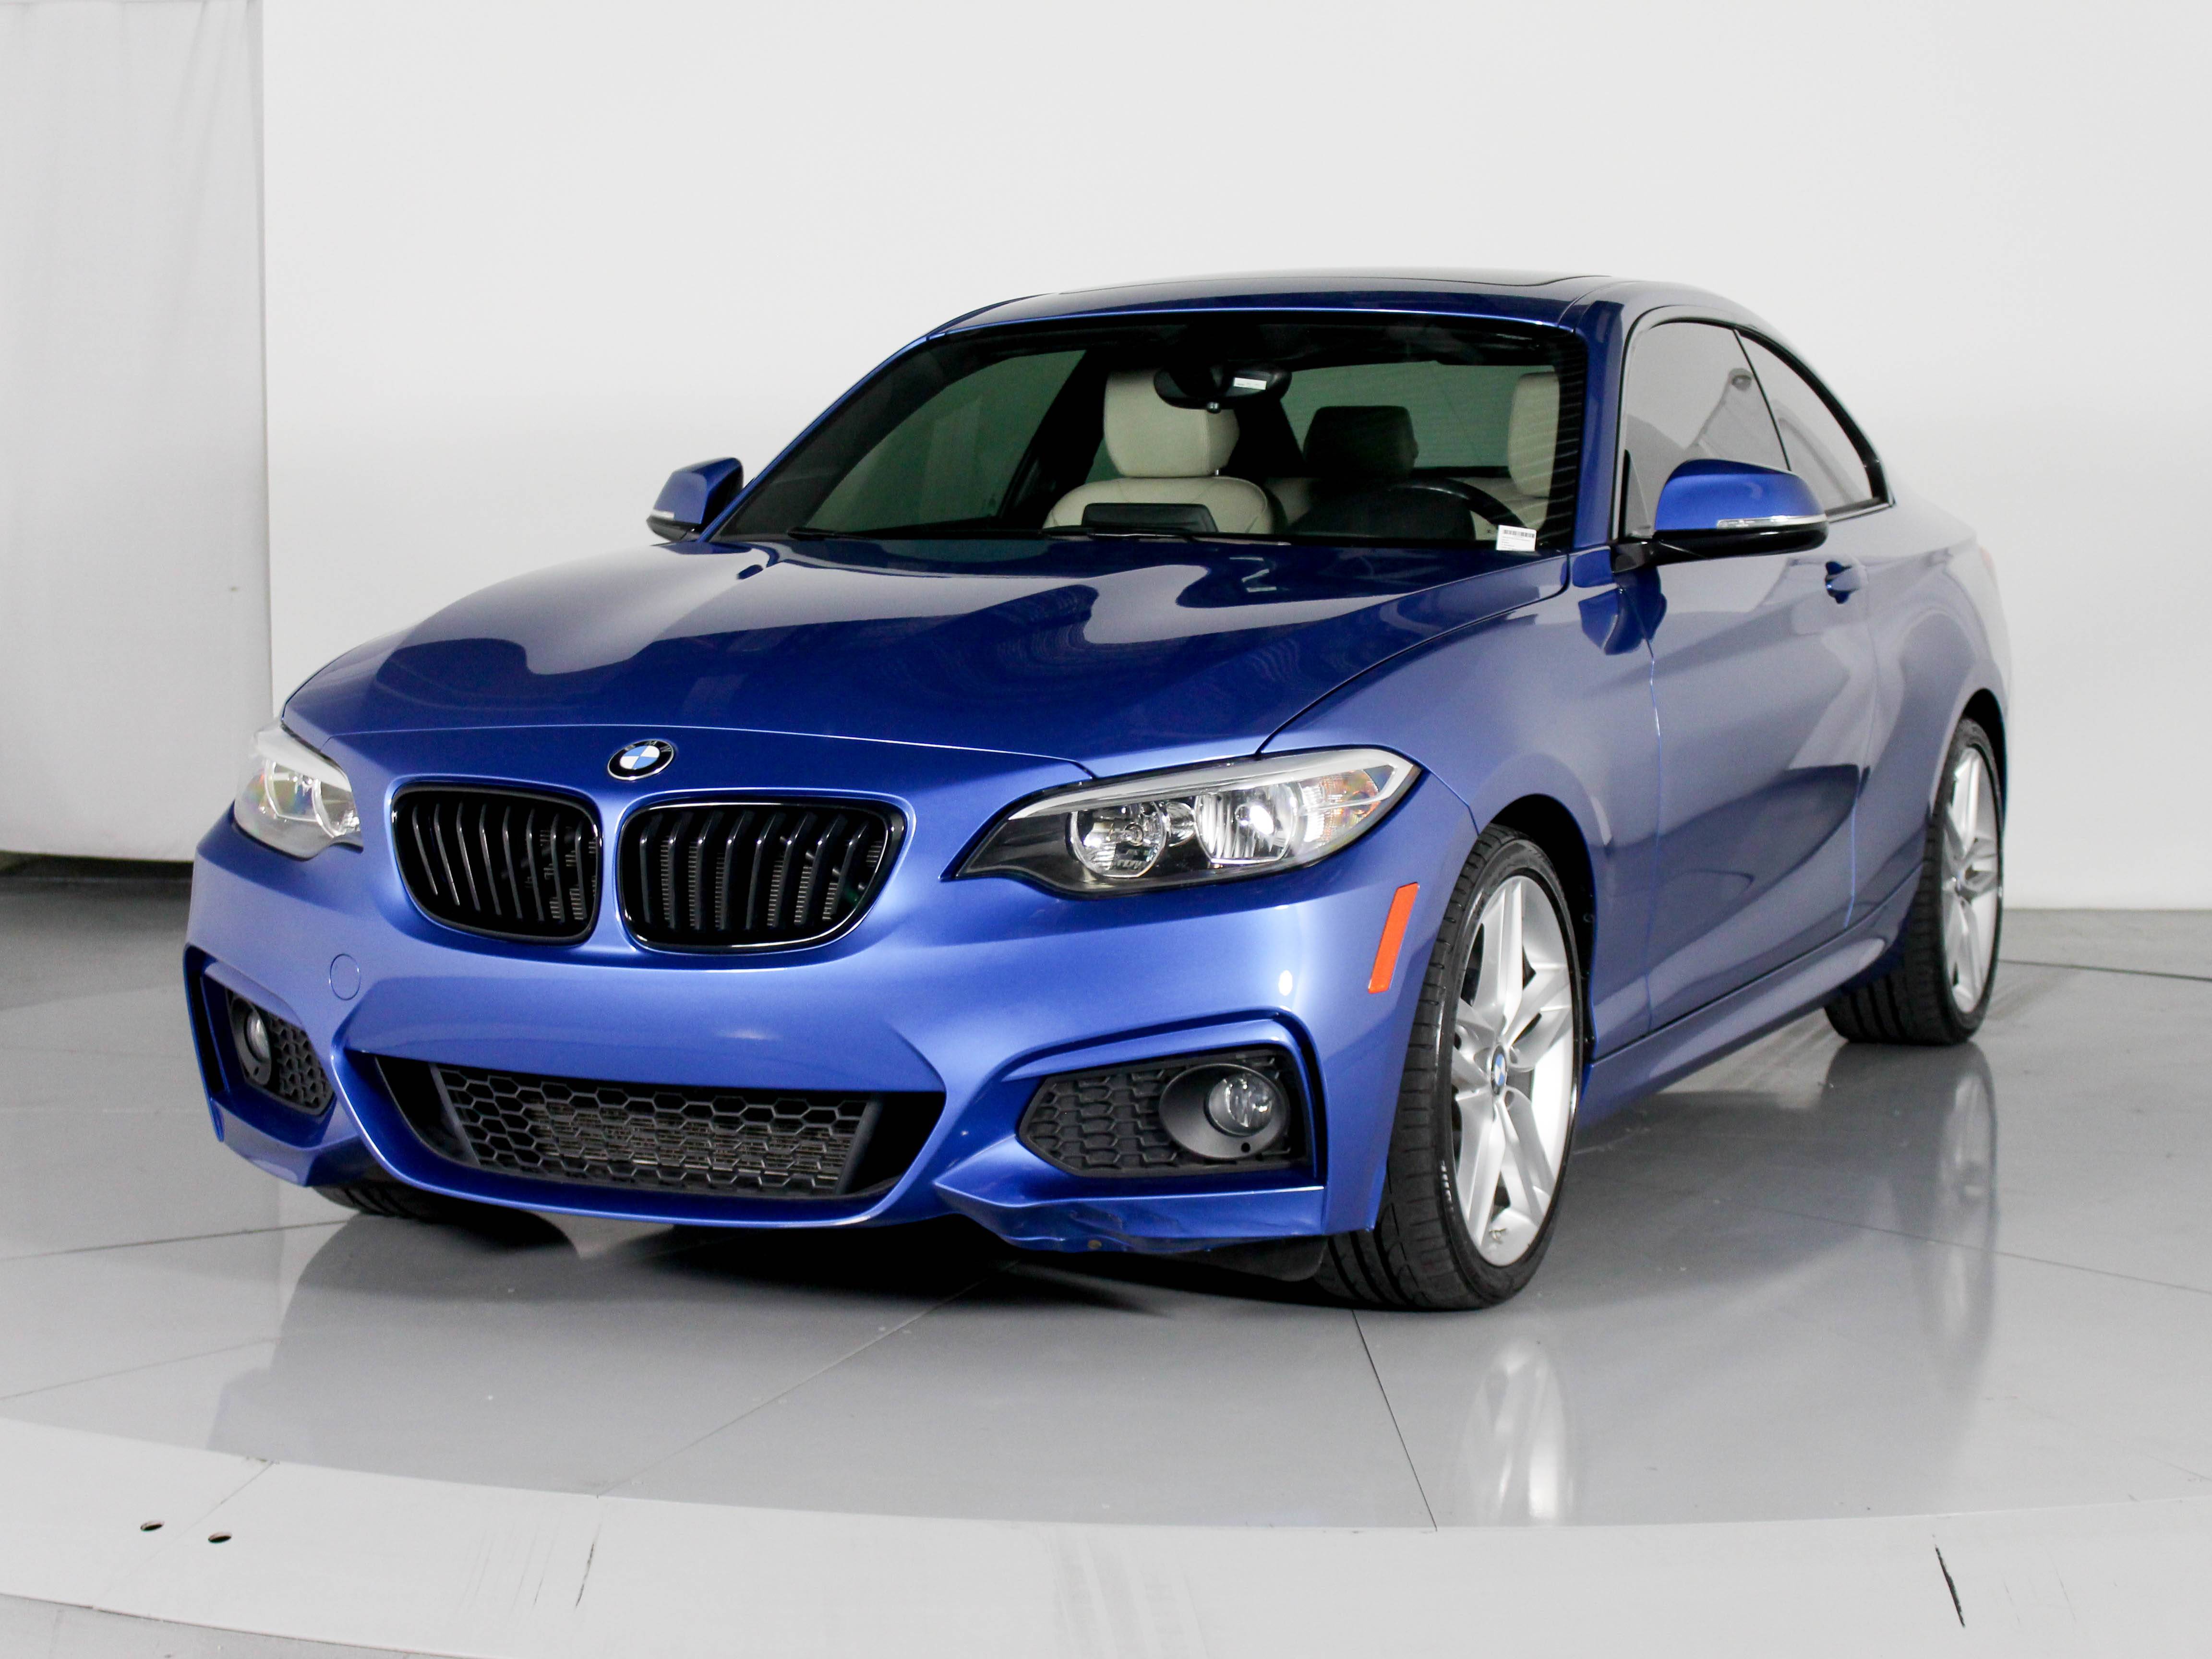 Used 2017 BMW 2 SERIES 230i M Sport Coupe for sale in MARGATE, FL